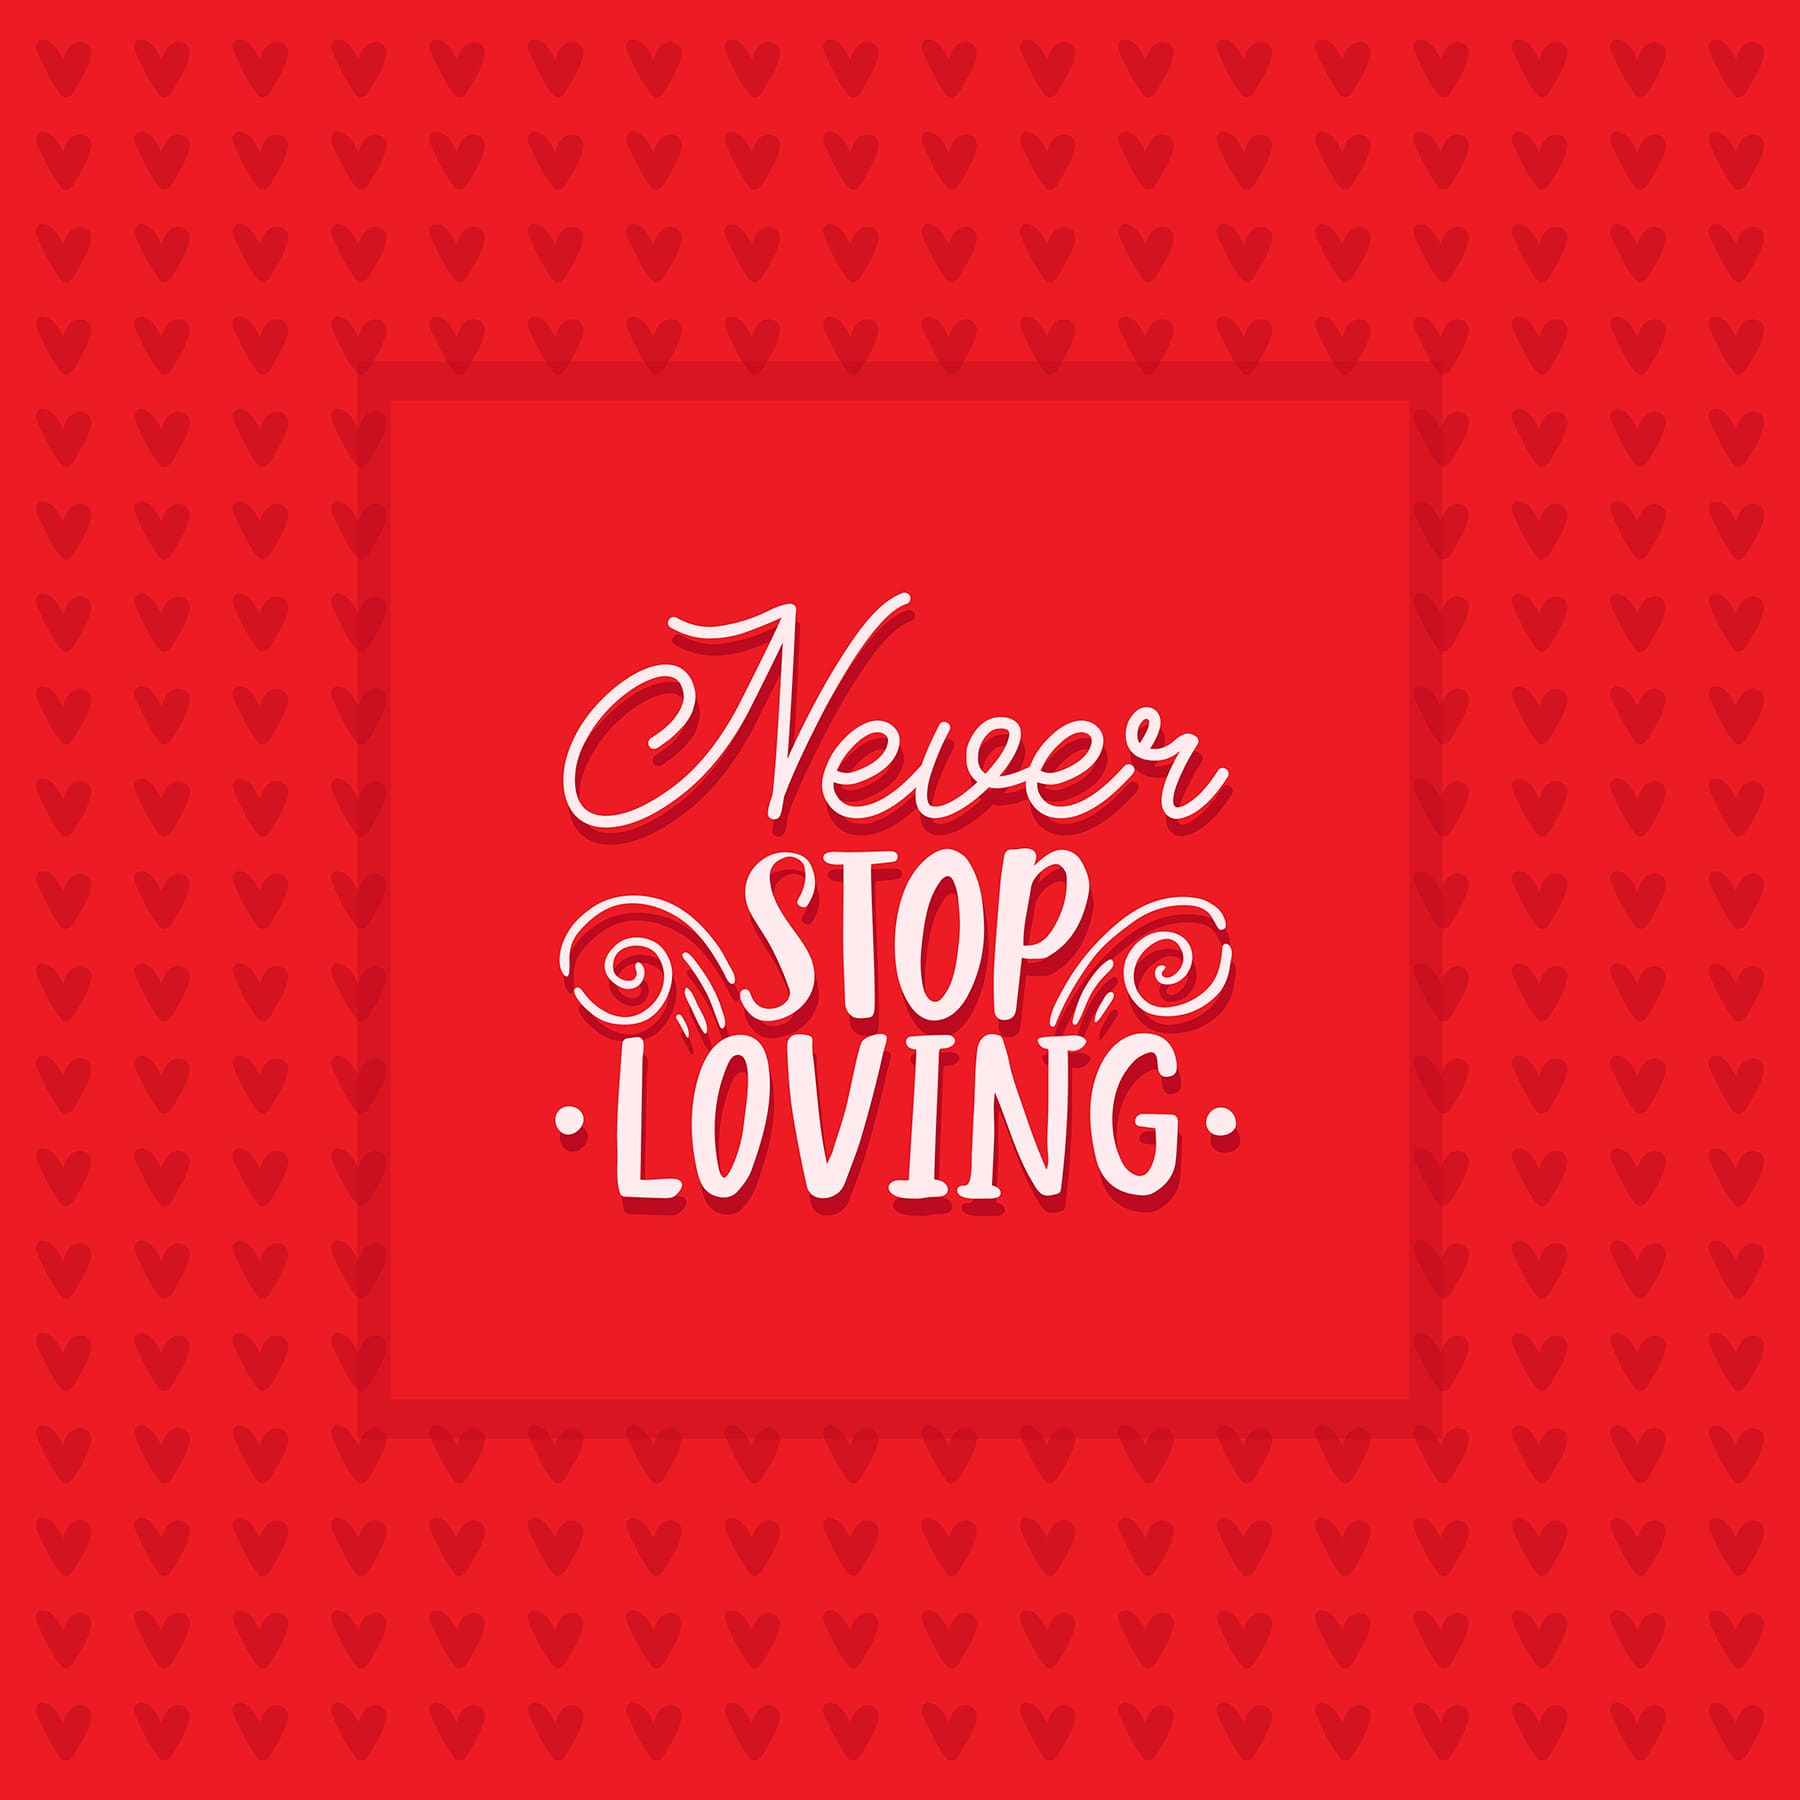 Love quotes background vector for free download with wordings " Never stop loving"